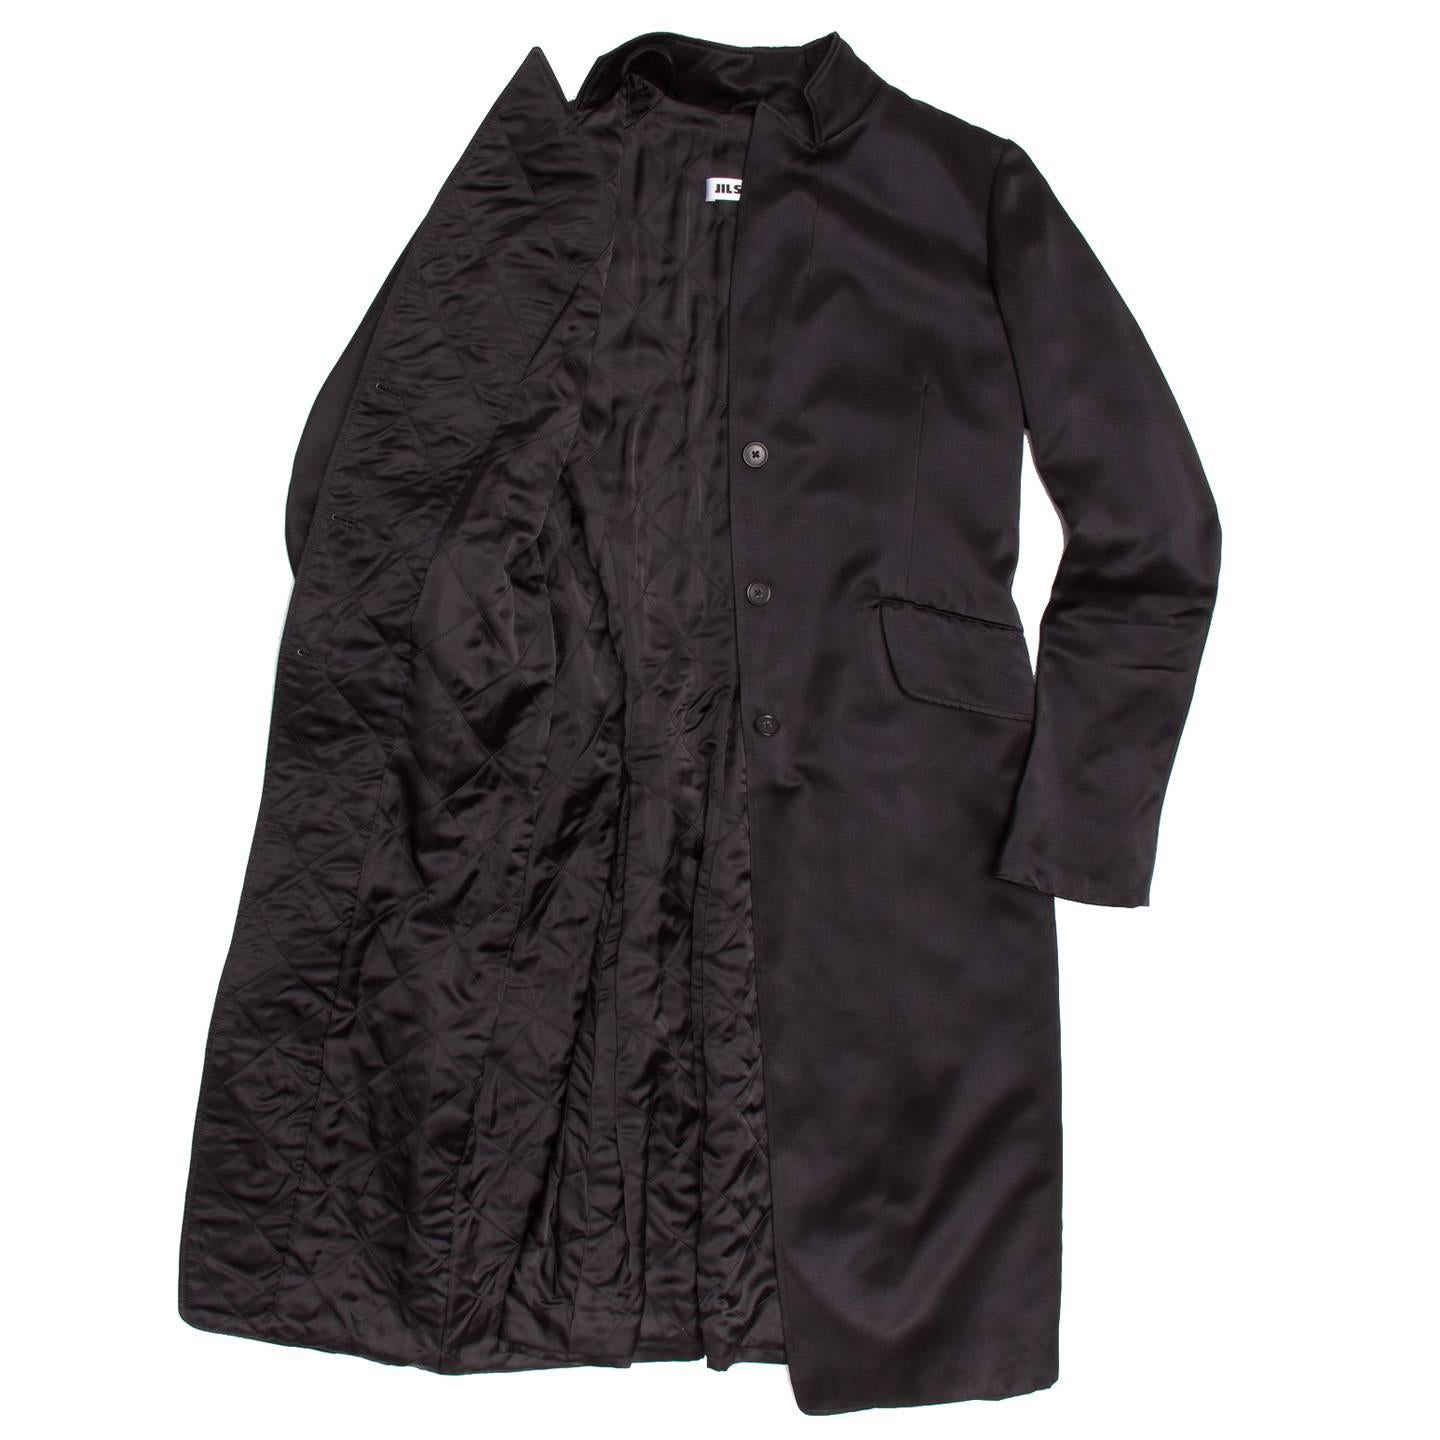 Jil Sander Black Silk Satin Coat In New Condition For Sale In Brooklyn, NY